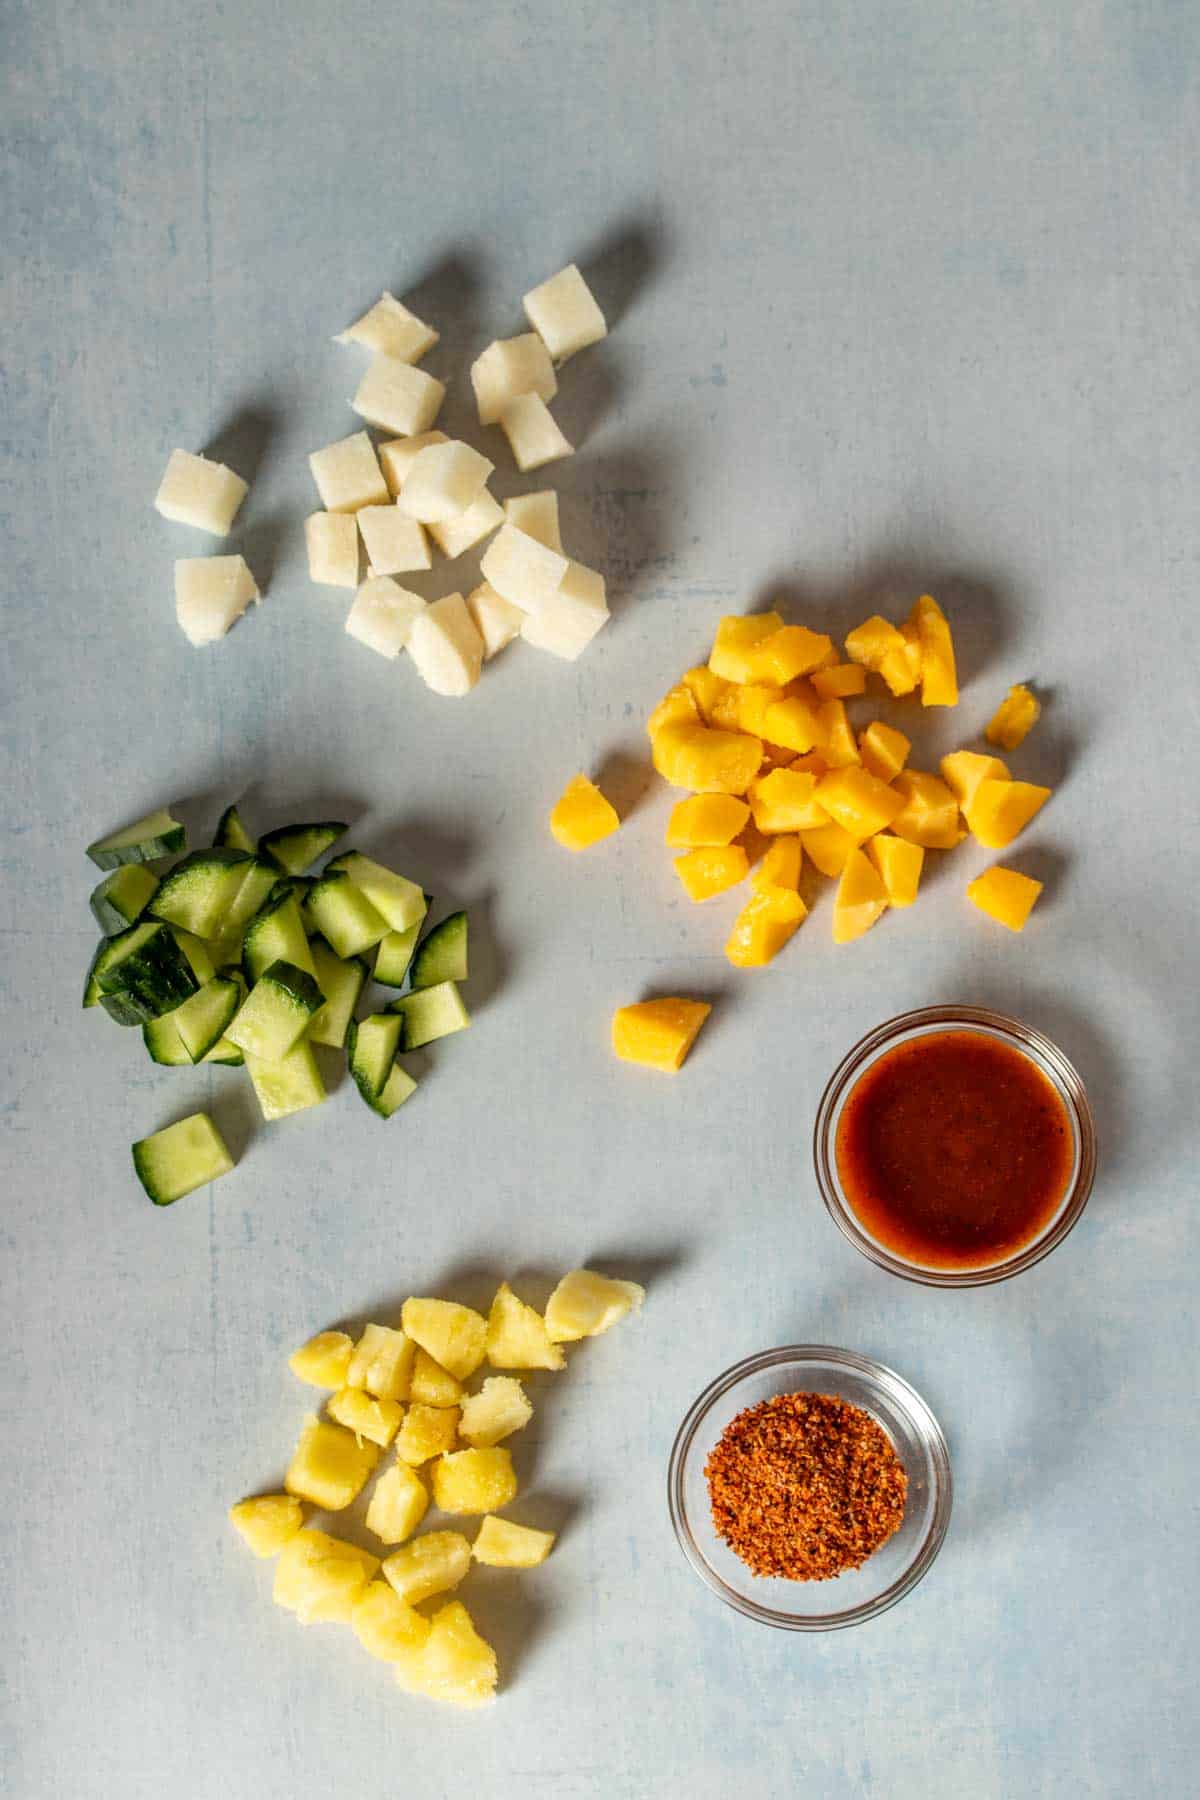 Top view of piles of chopped cucumber, jicama, mango, pineapple and small glass bowls of a red sauce and chile lime seasoning.